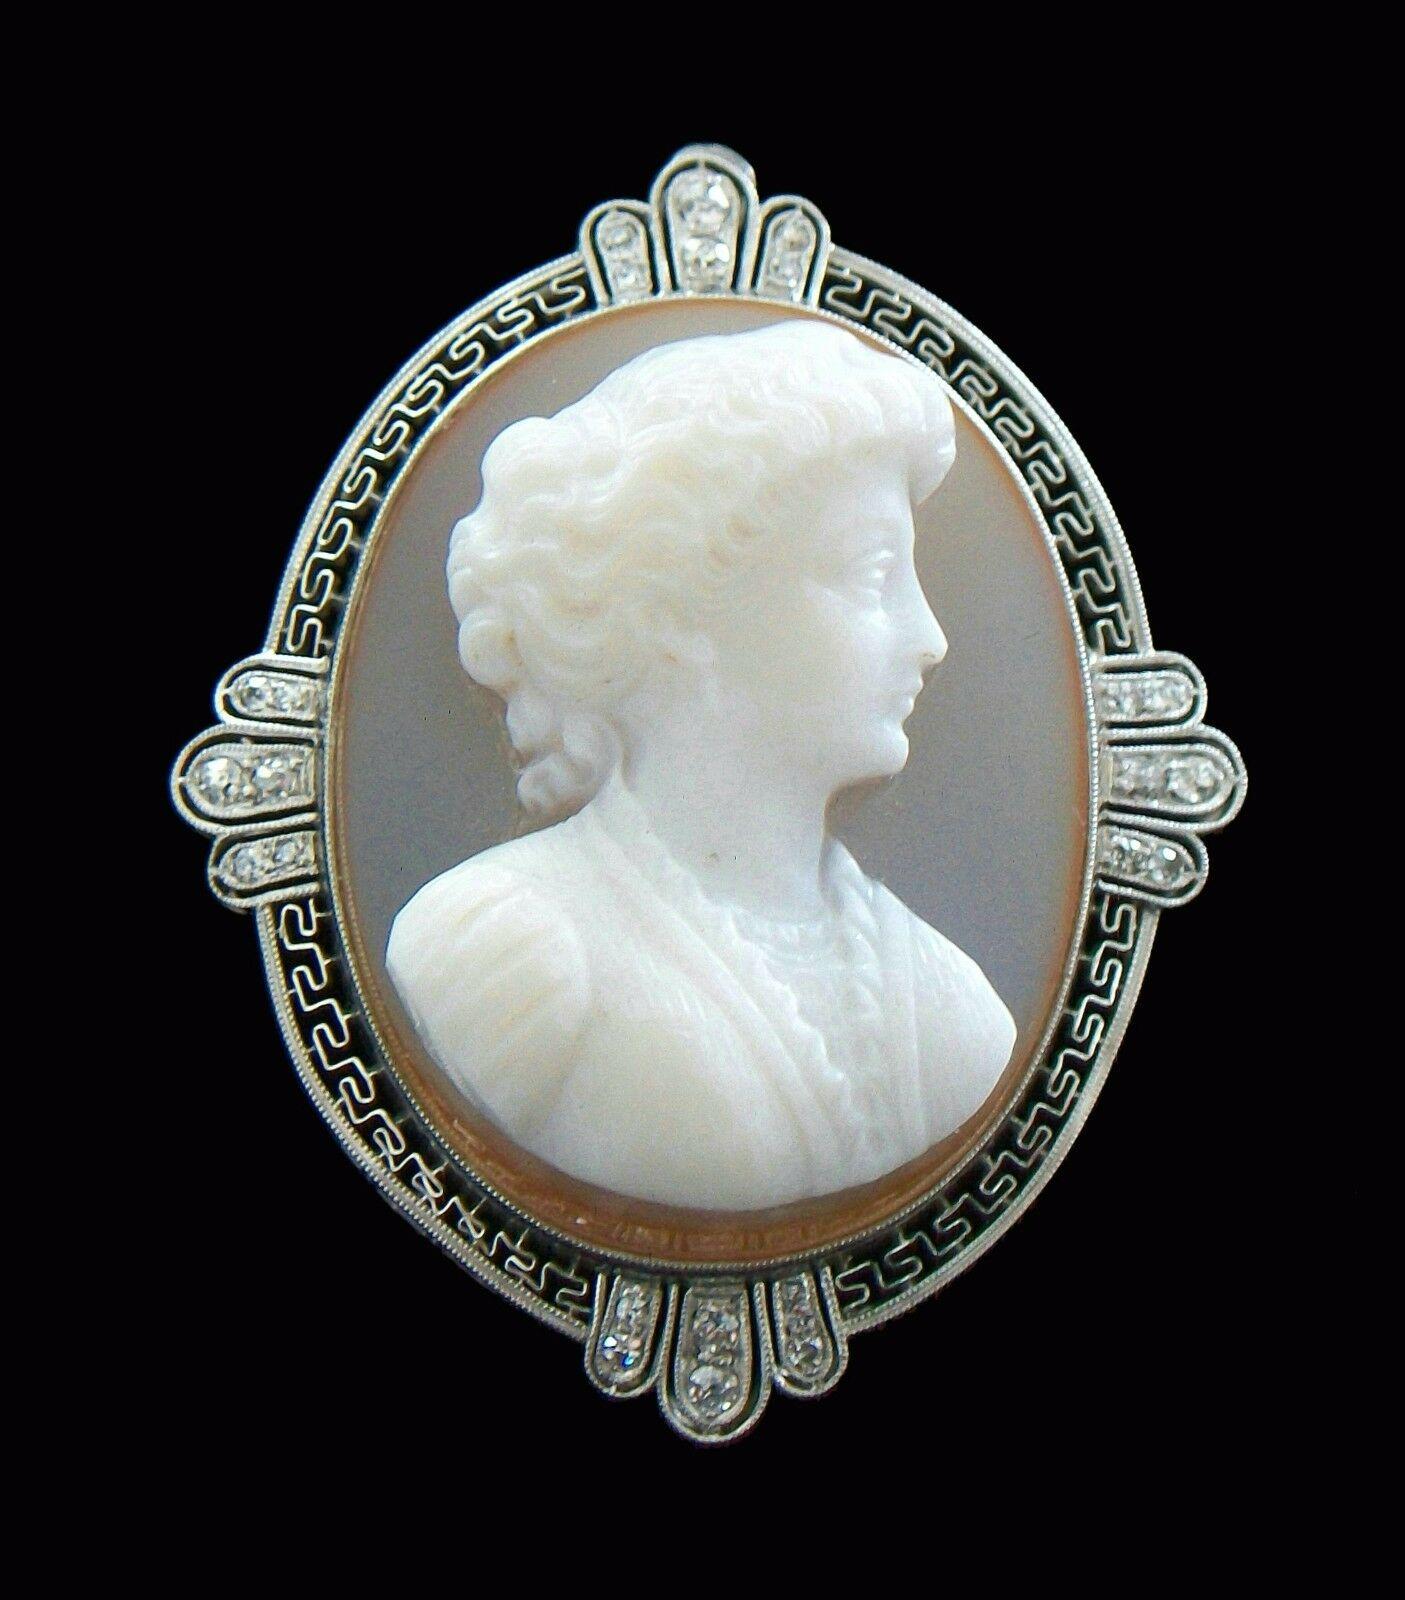 Extraordinary Belle Époque custom made hand carved sardonyx cameo brooch or pendant with retractable bail - the deep relief three layer sardonyx cameo (brown  mauve  white) contained in a filigree and mill-grained Platinum frame with a Greek key